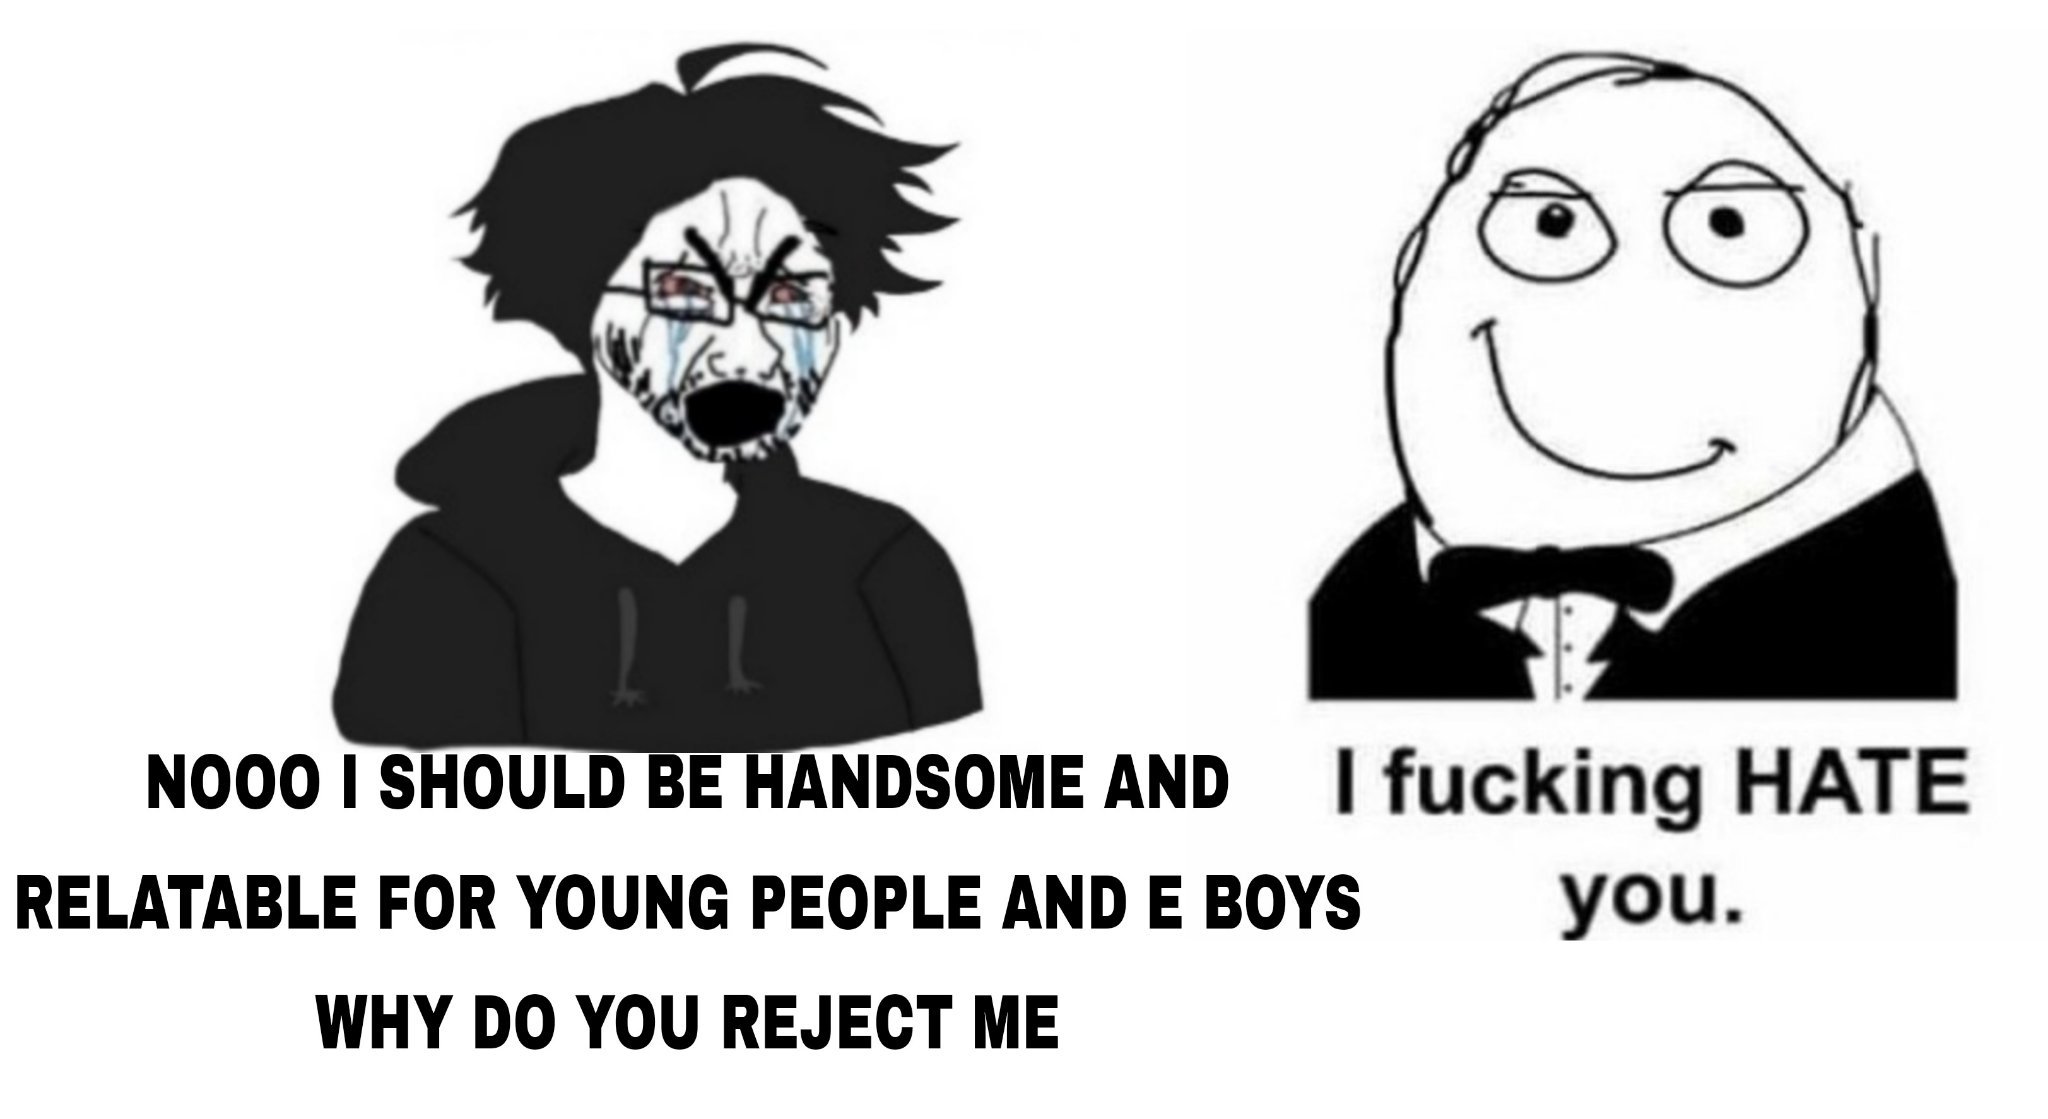 Reject femboy and e-boy turn back to rage comic - meme